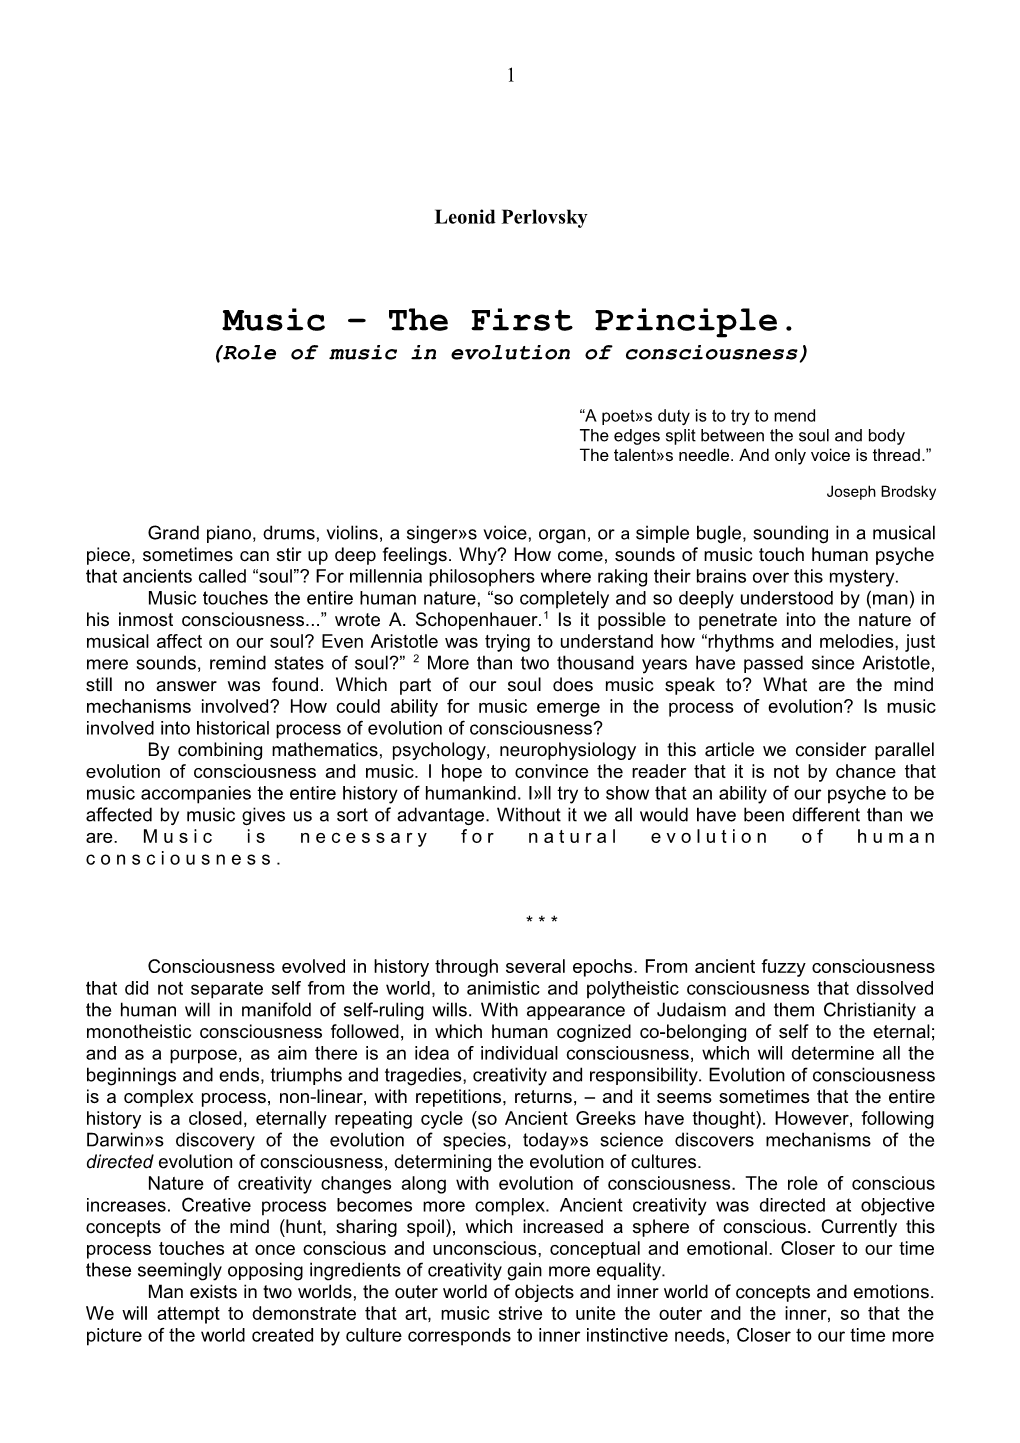 Music the First Principle